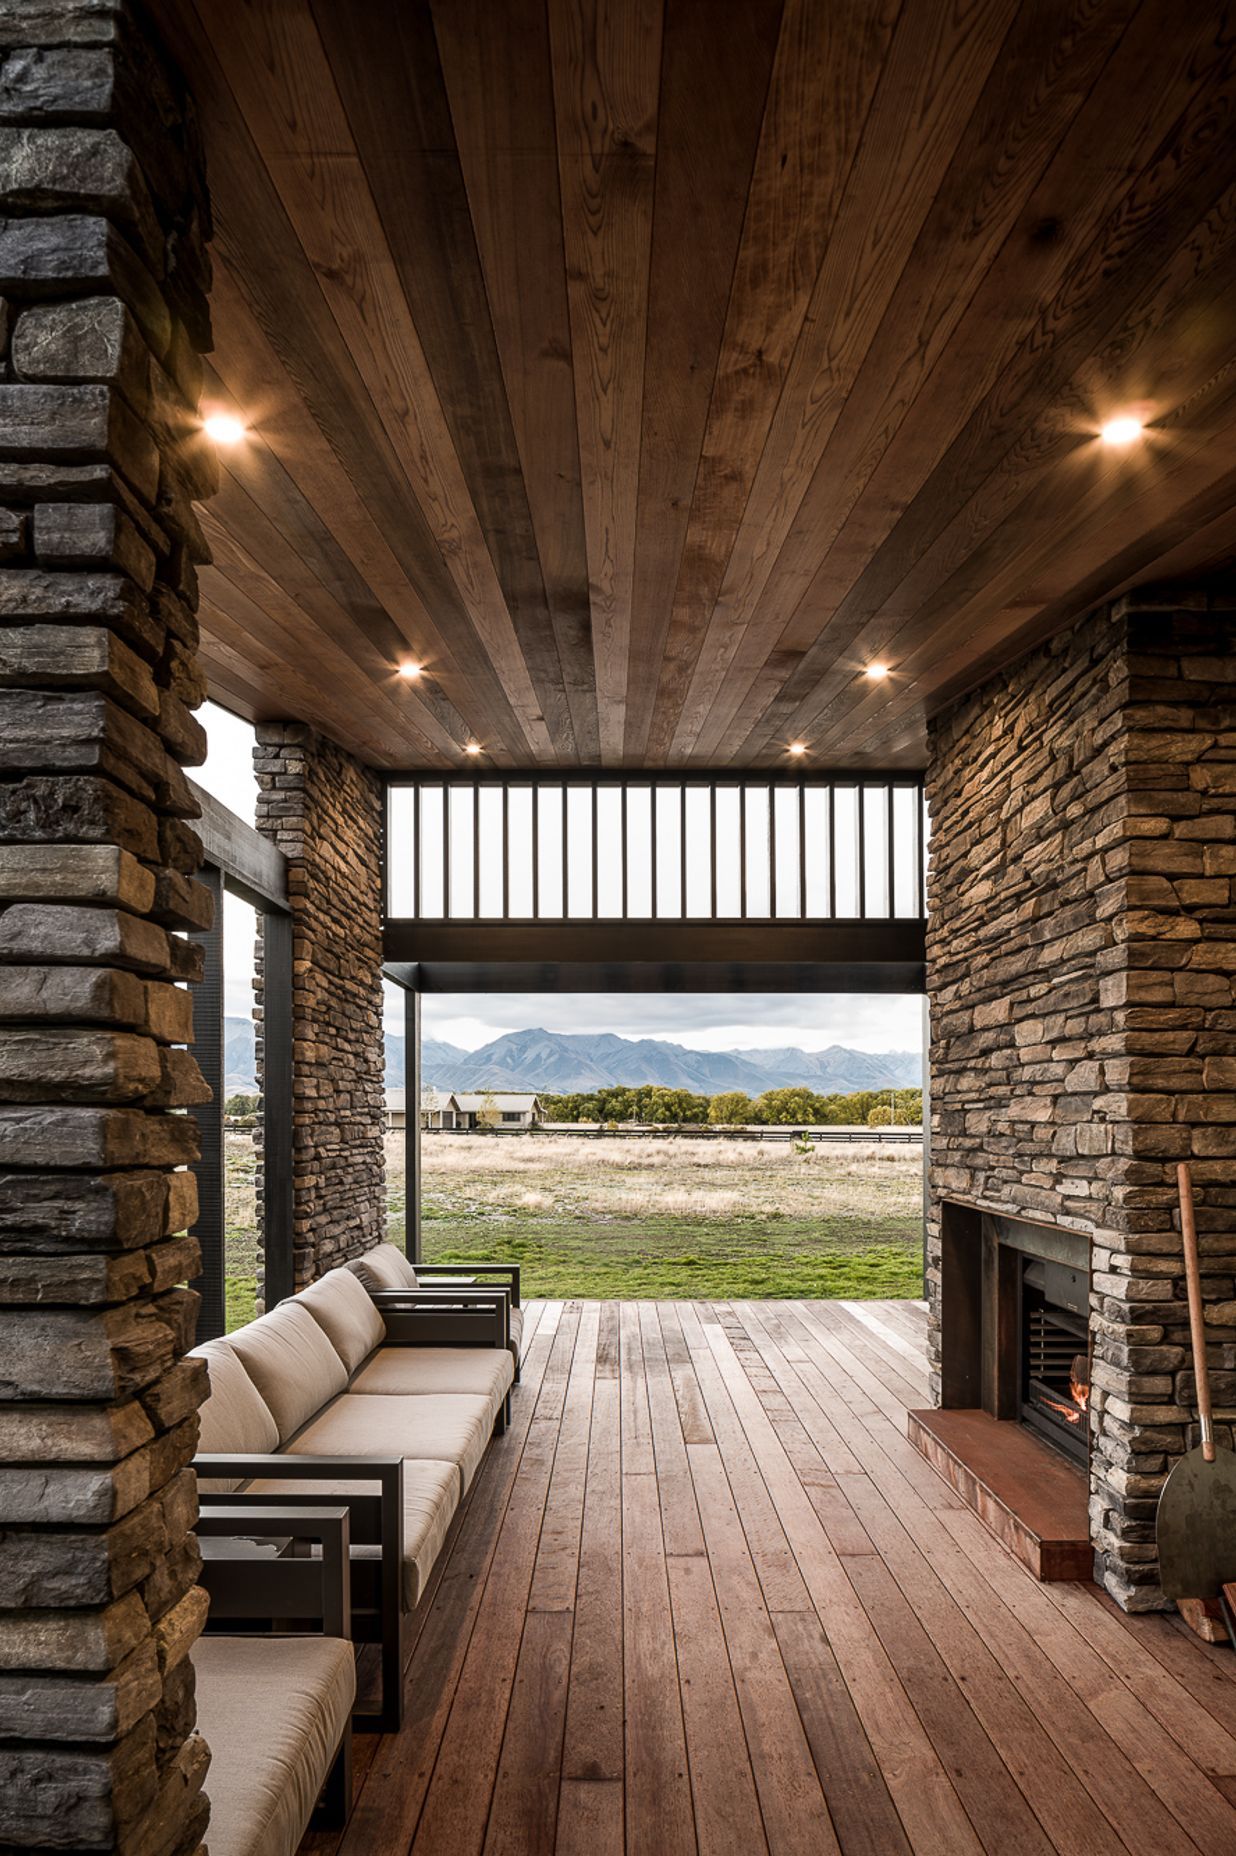 The stone walls, coupled with timber floor and ceiling, add a further dimension of warmth to the evening terrace.